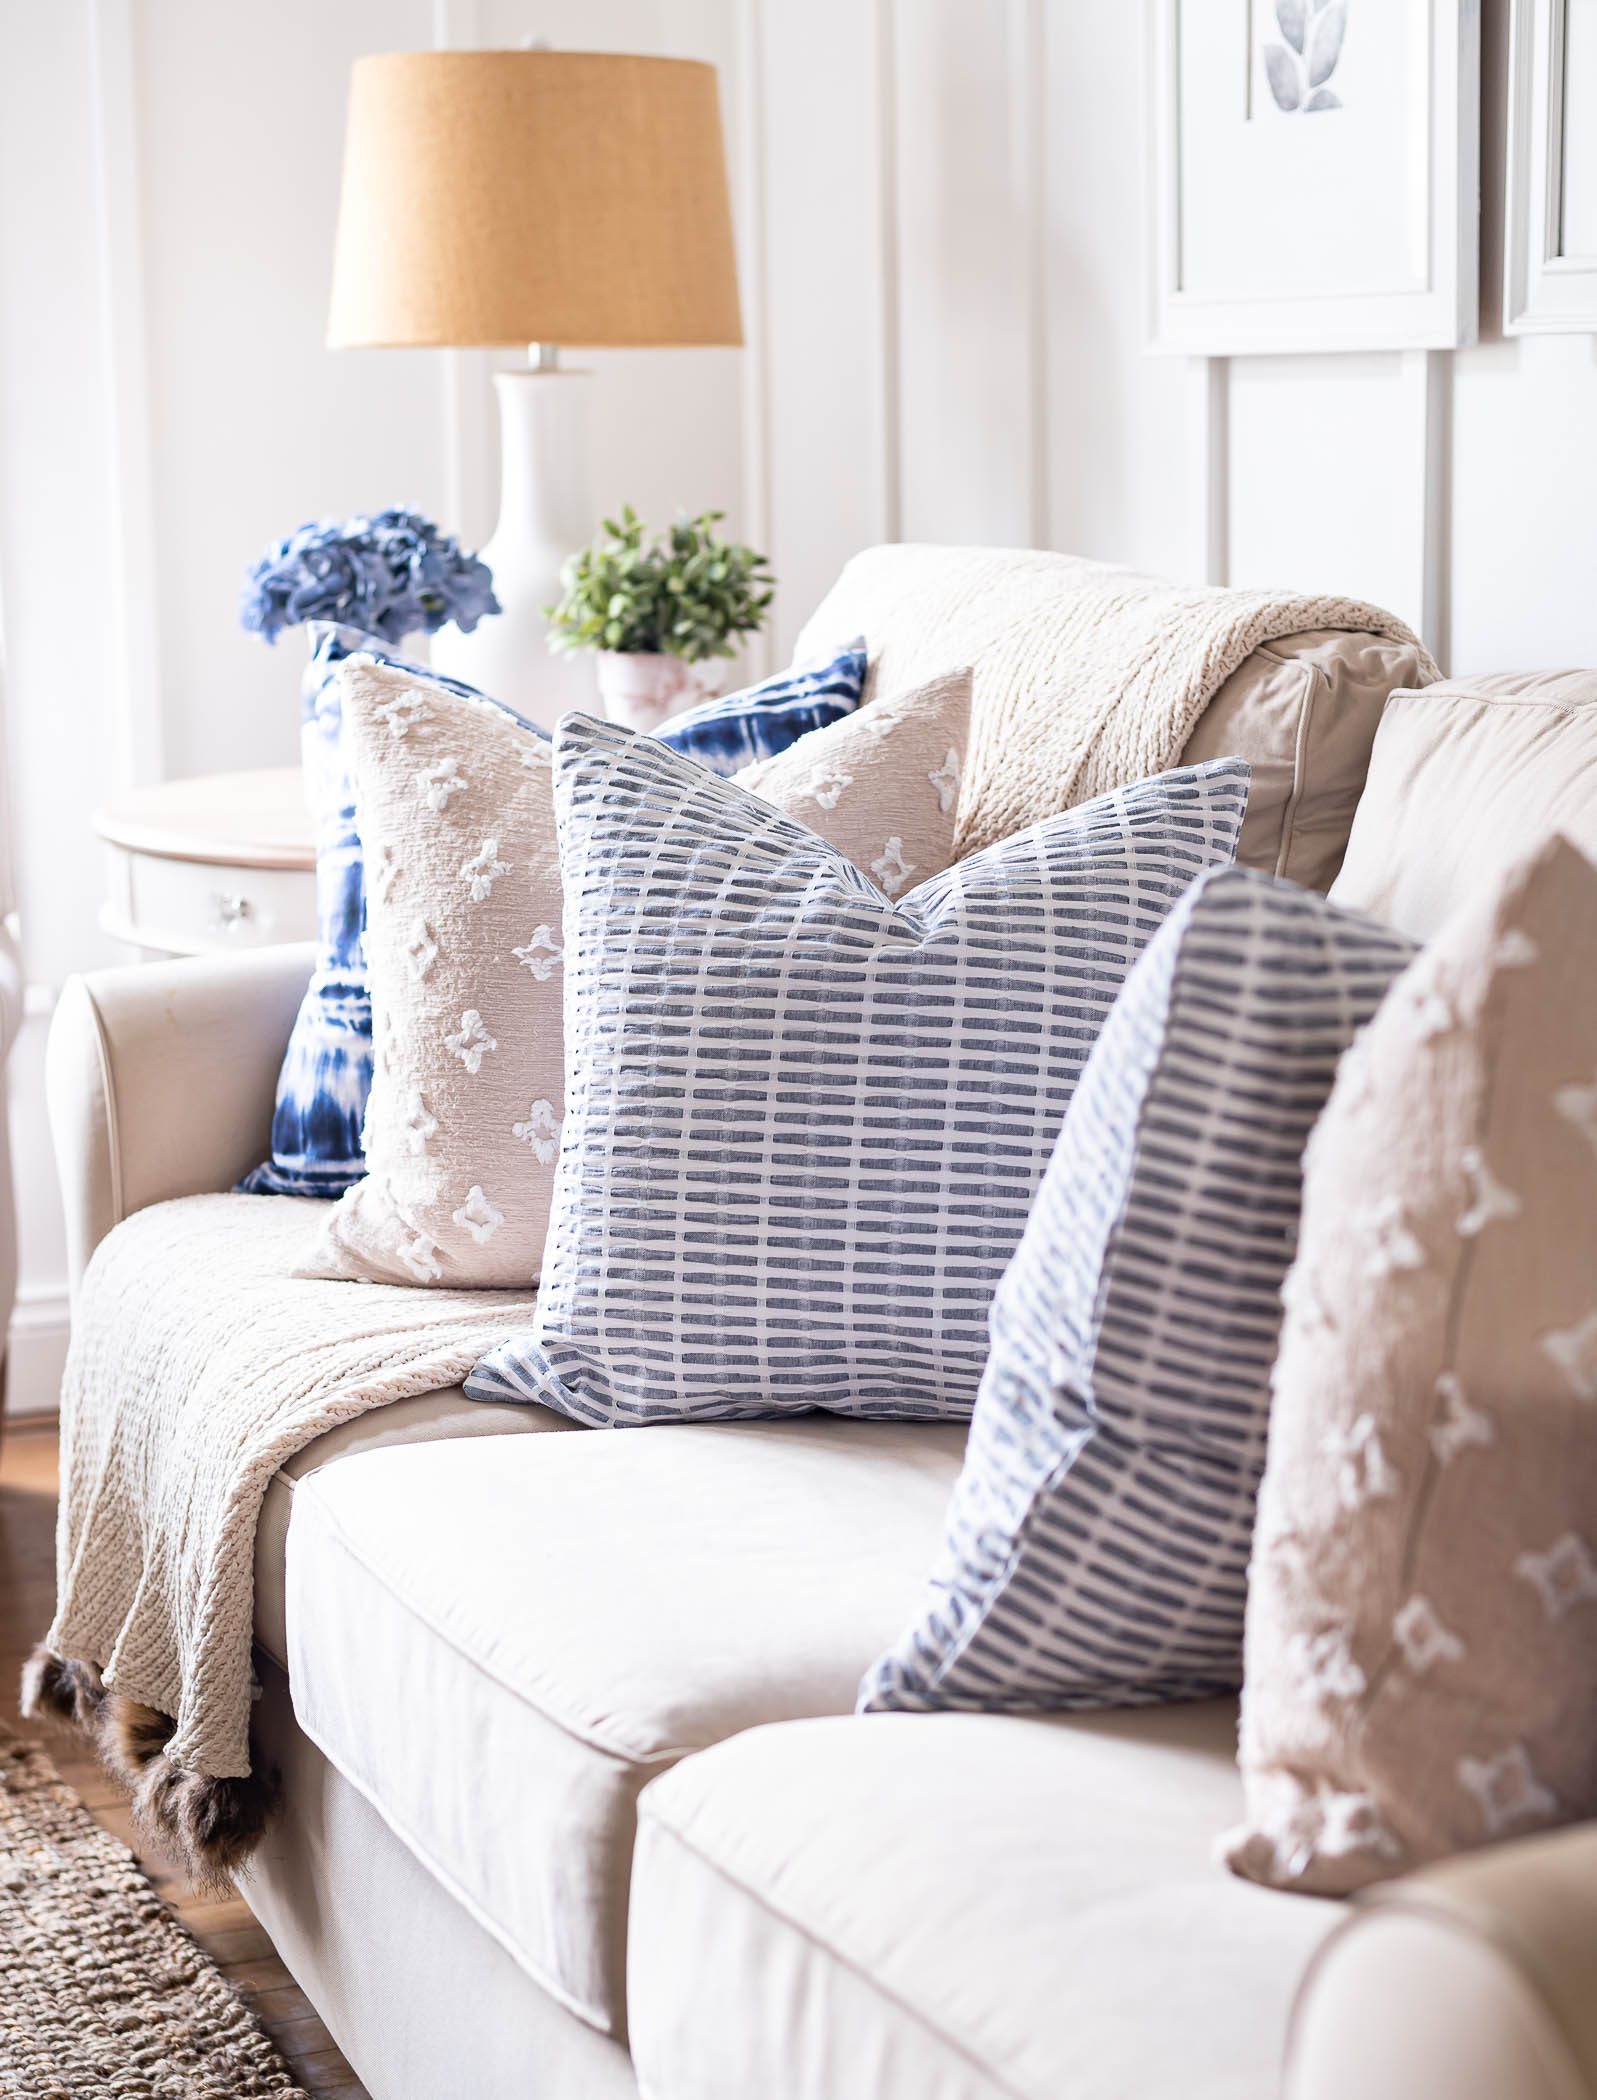 Pottery Barn Tan Couch, Blue and White Seersucker Pillow Covers; Blue and White Spring Decor